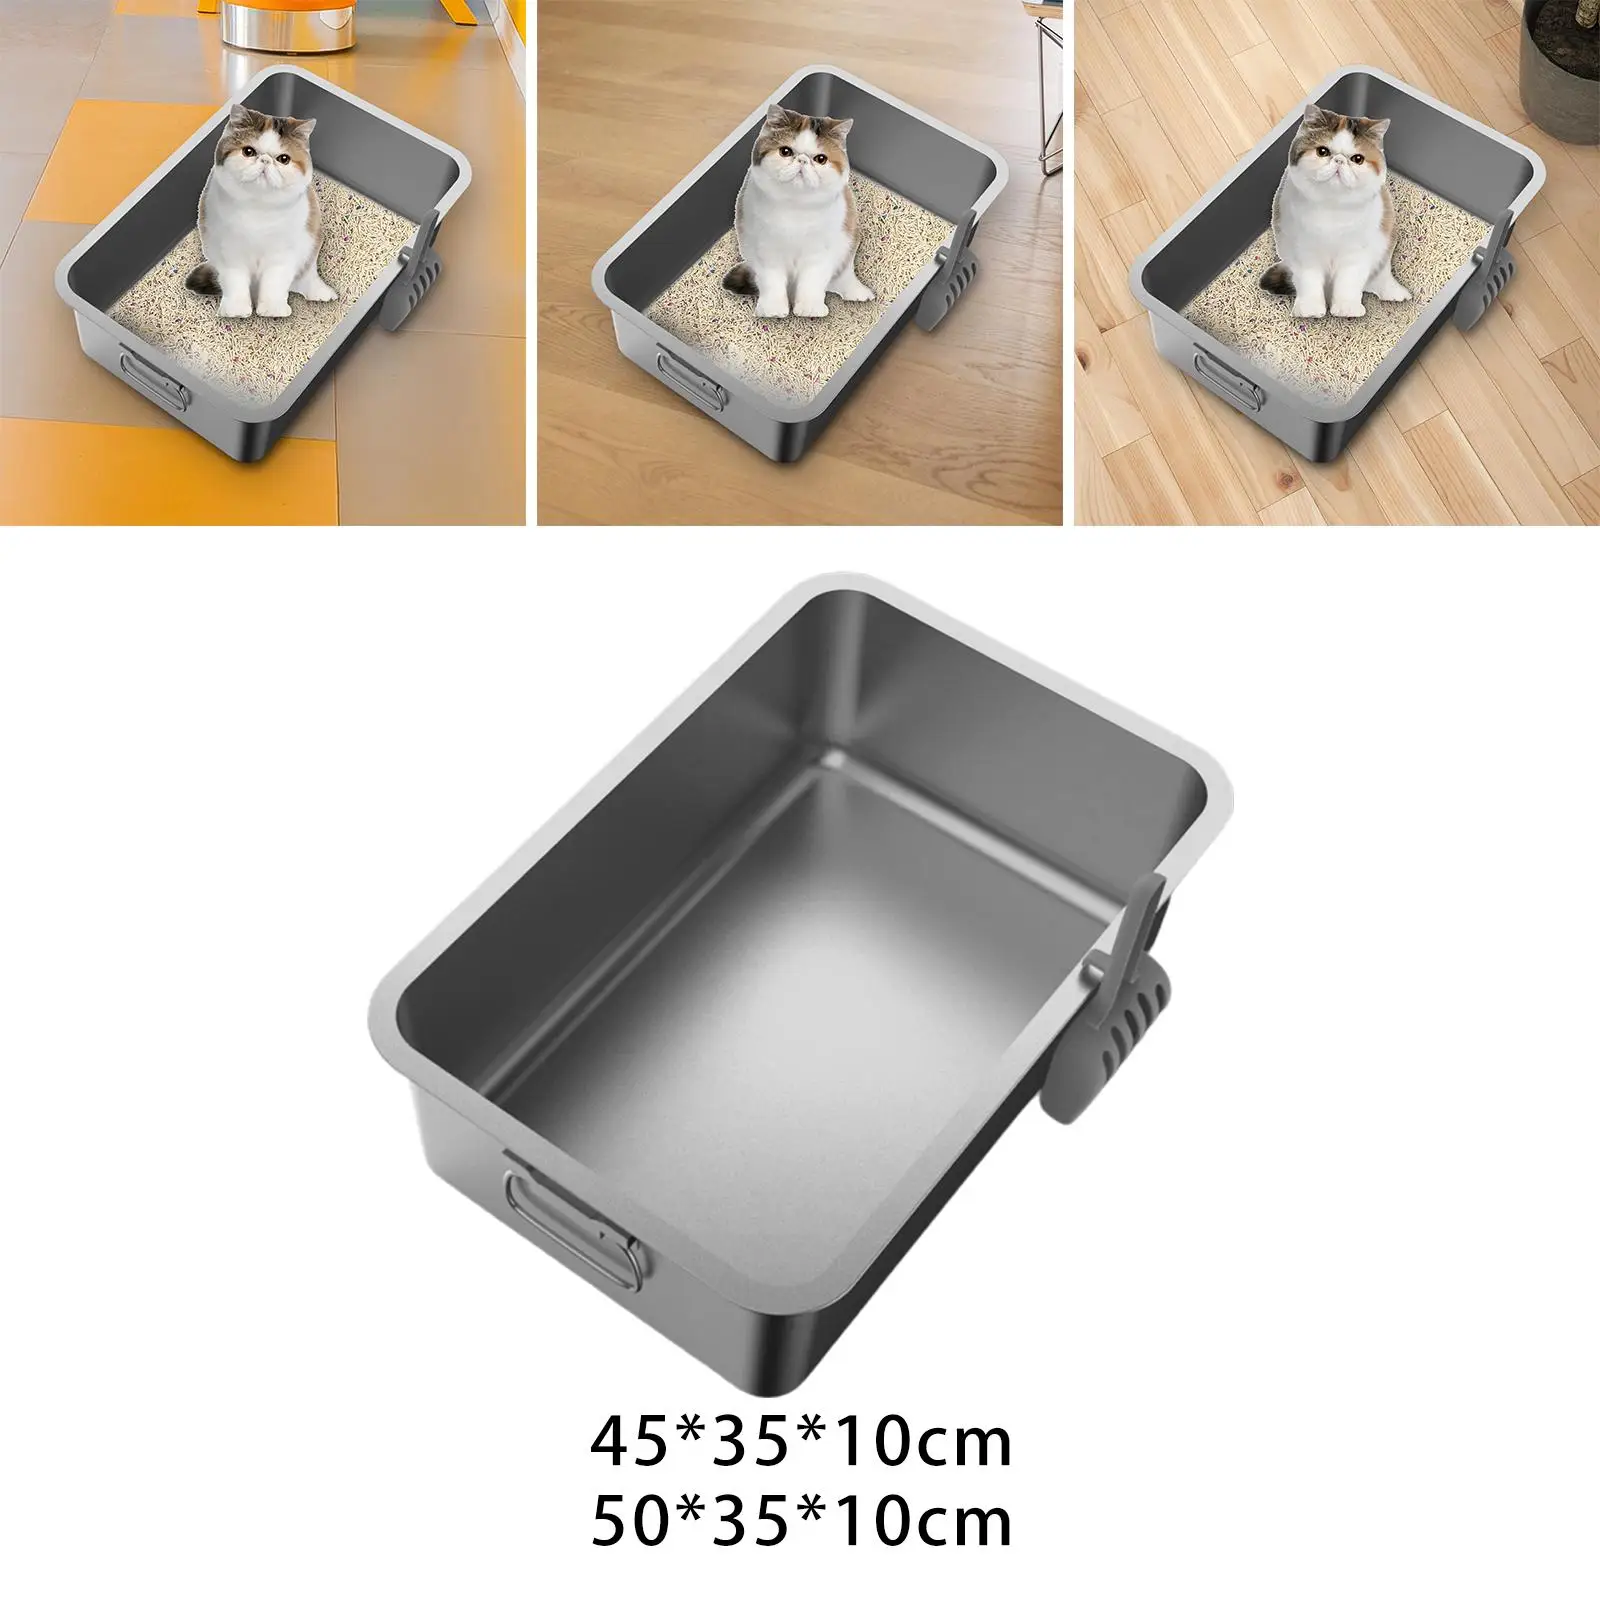 Rabbit Cat Litter Container Holder Stainless Steel Rust Free with Side Carrying